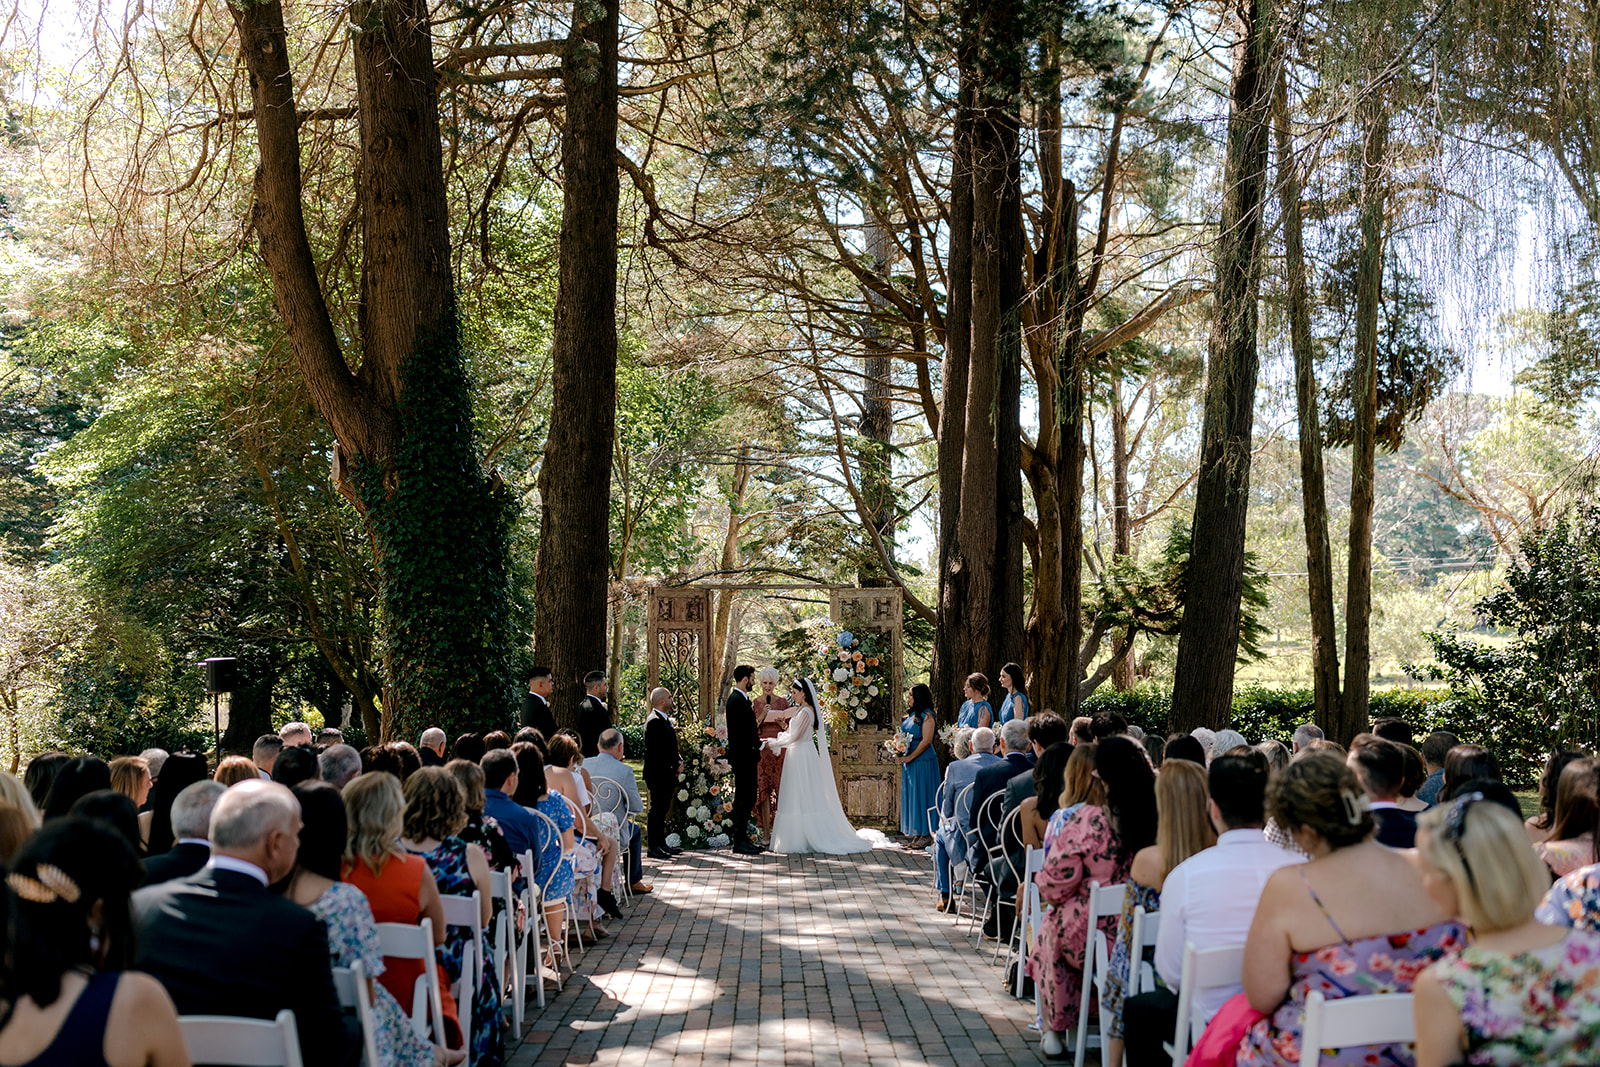 Elegant country wedding at Montrose House in the Southern Highlands of NSW.